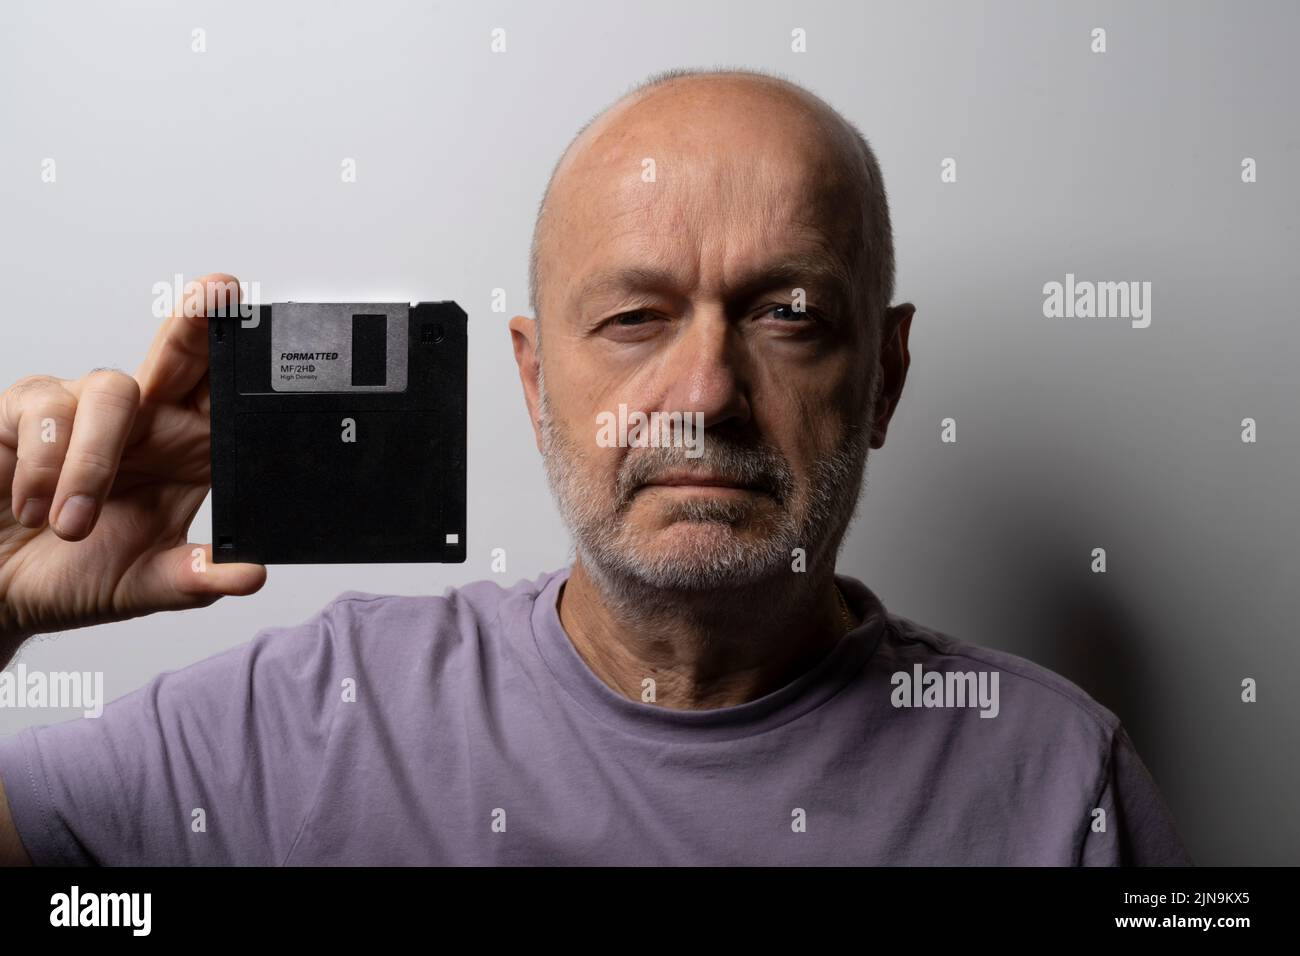 a man with an old floppy disk in his hand Stock Photo